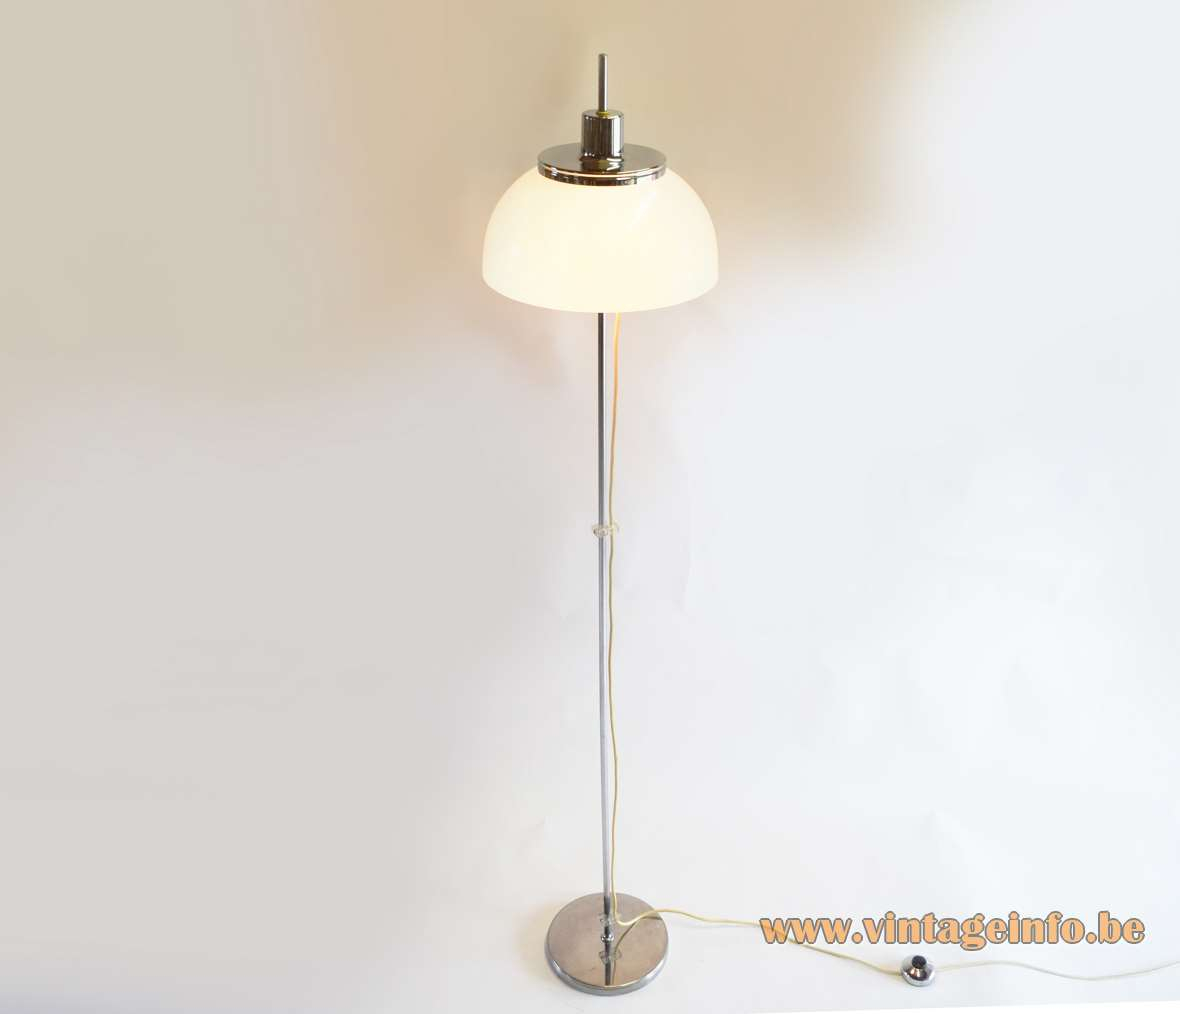 Harvey Guzzini Faro Floor Lamp Vintage Info All About within size 1180 X 1014